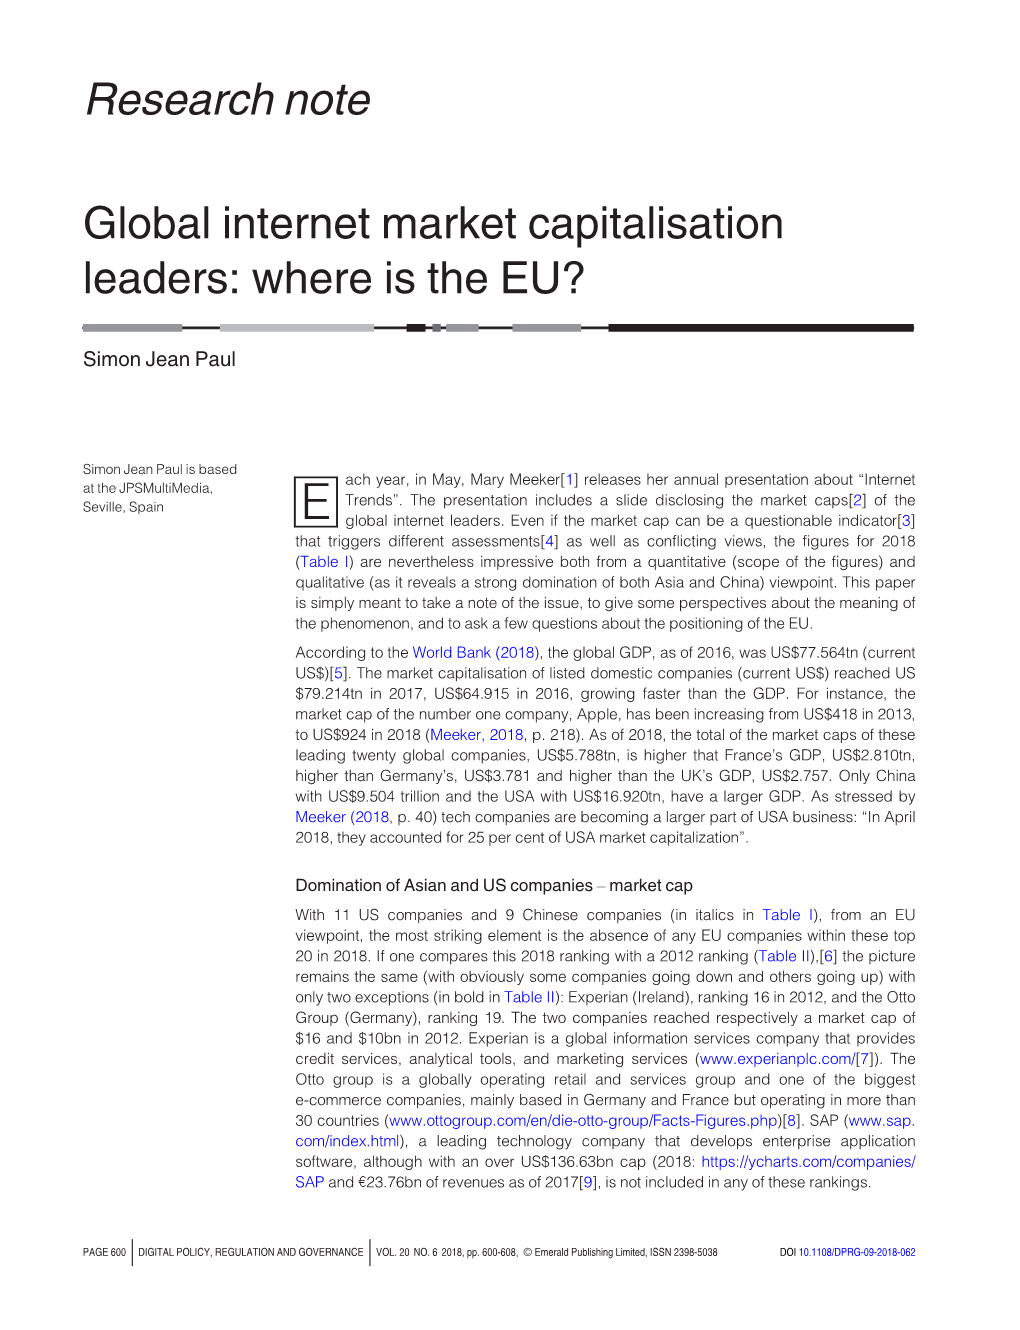 Research Note Global Internet Market Capitalisation Leaders